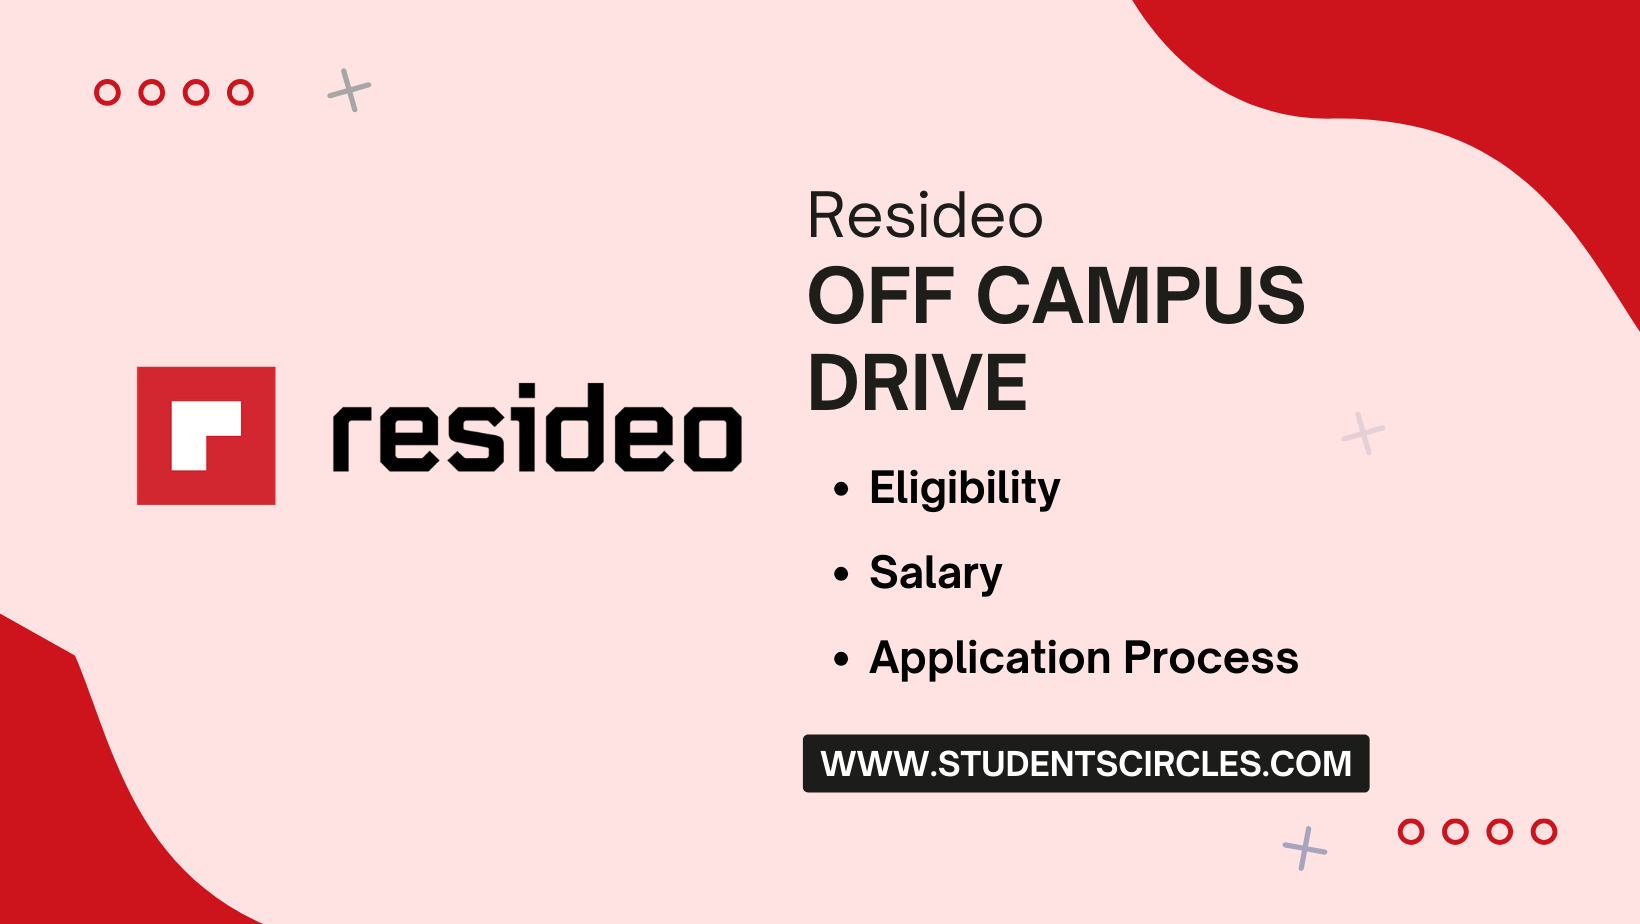 Resideo Off Campus Drive